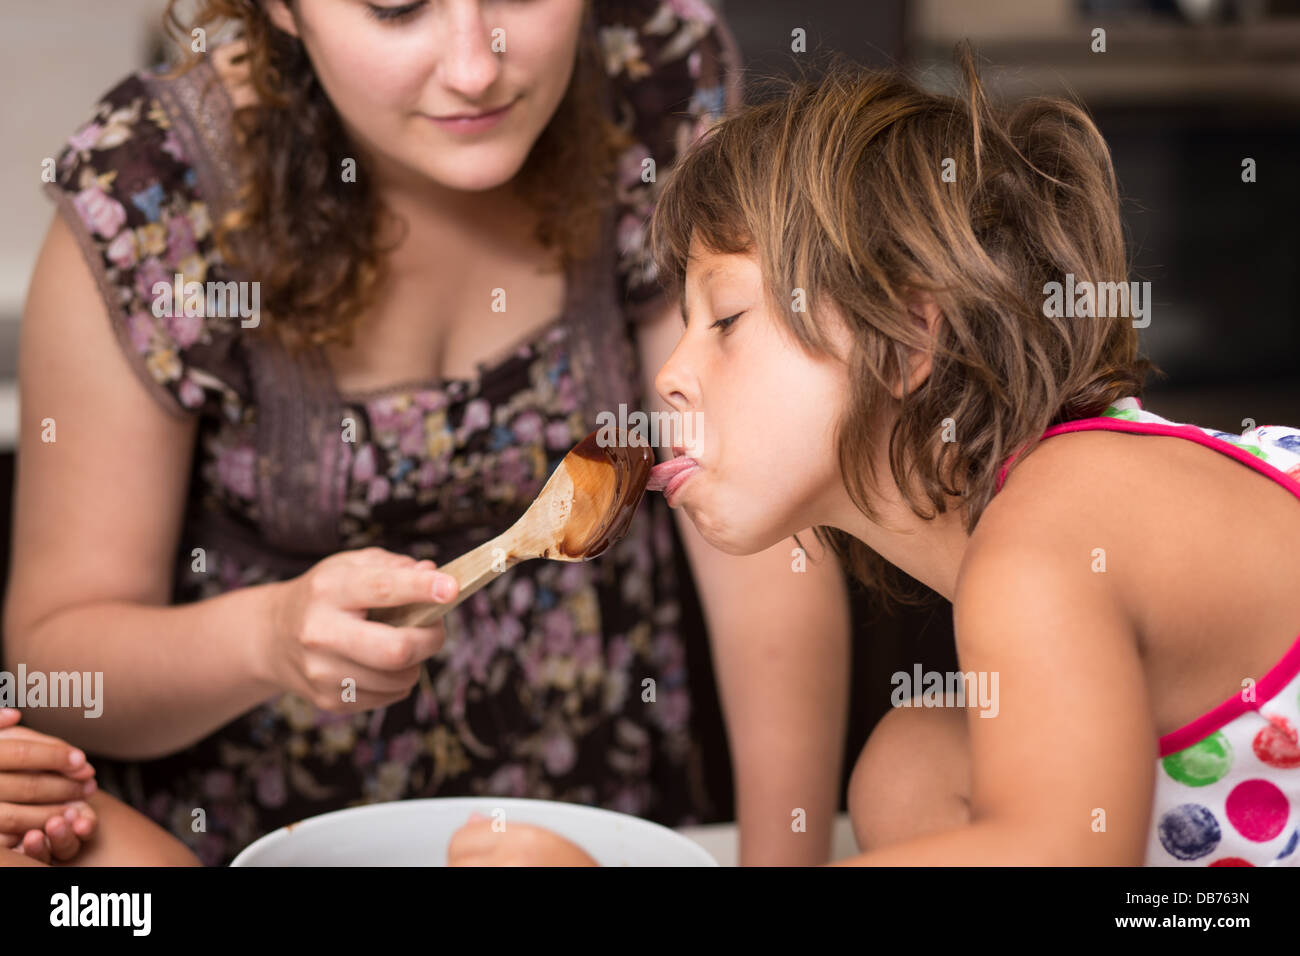 Young girl licking chocolate off a spoon Stock Photo